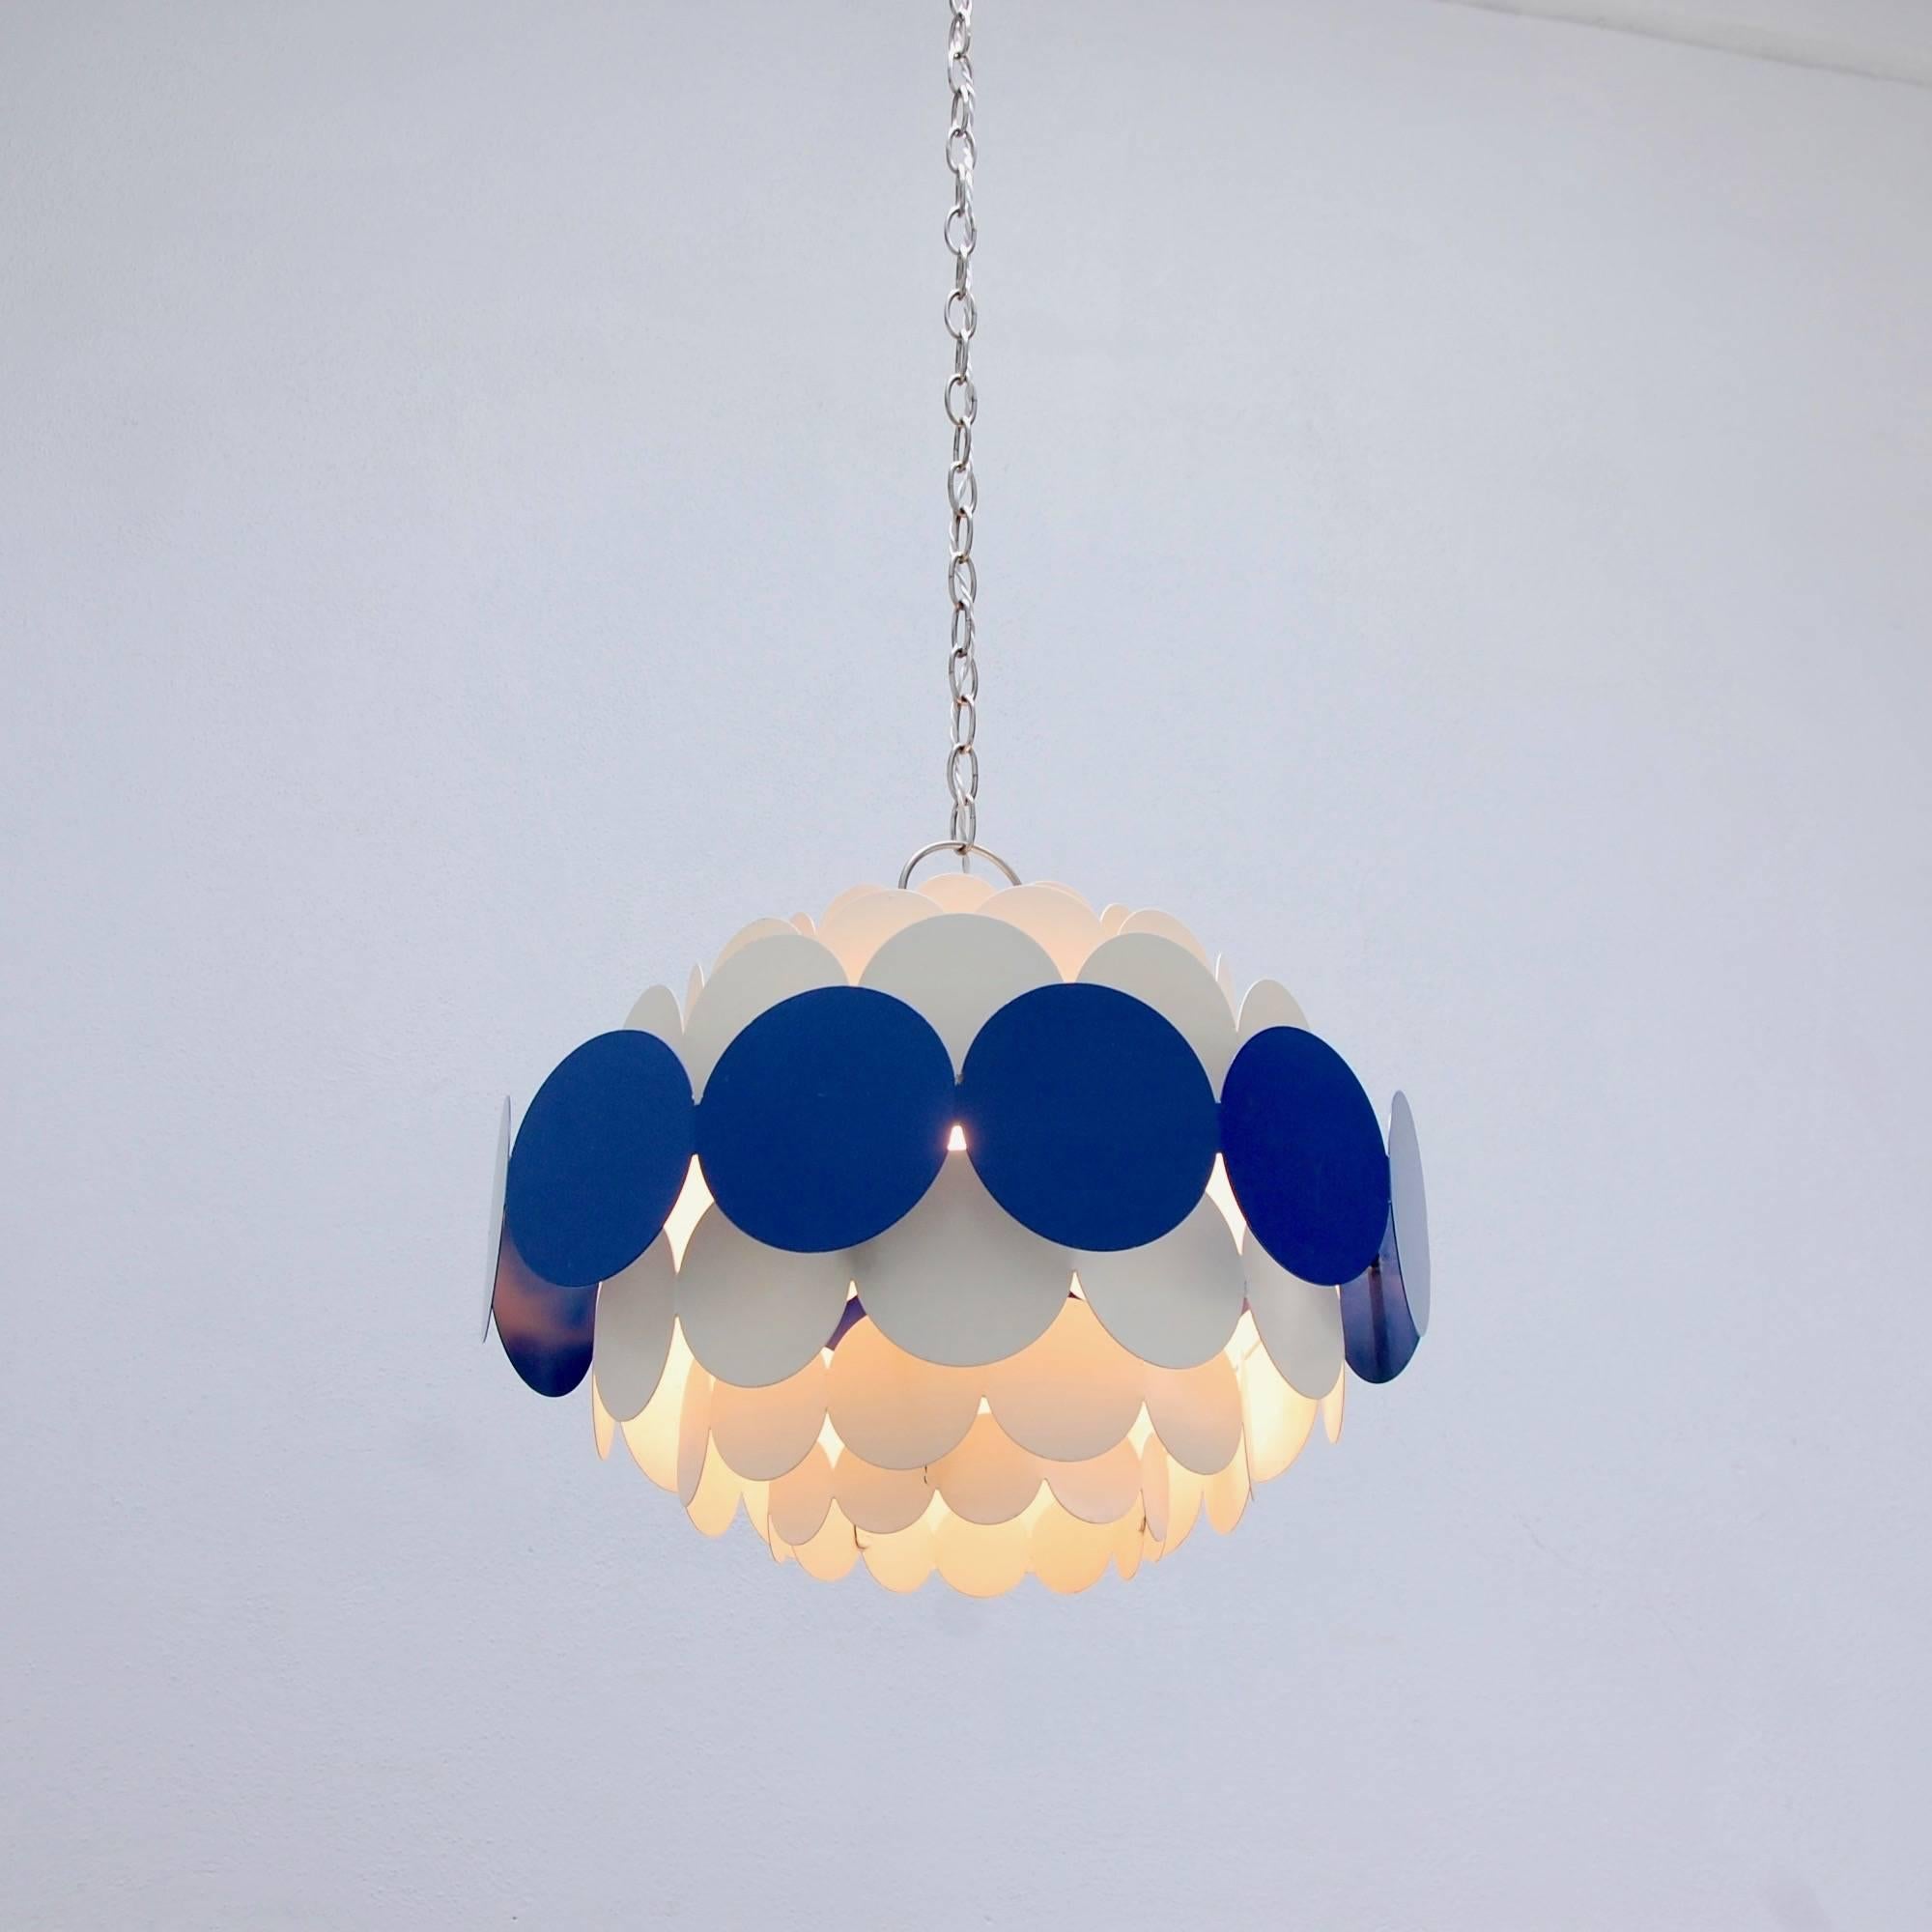 Modern and elegant midcentury vintage Italian tiered pendant chandelier in deep blue and cream painted steel and aged nickel. Original finish. Currently wired for the US. Three medium-based E26 sockets. Total maximum wattage recommended 180 watts.